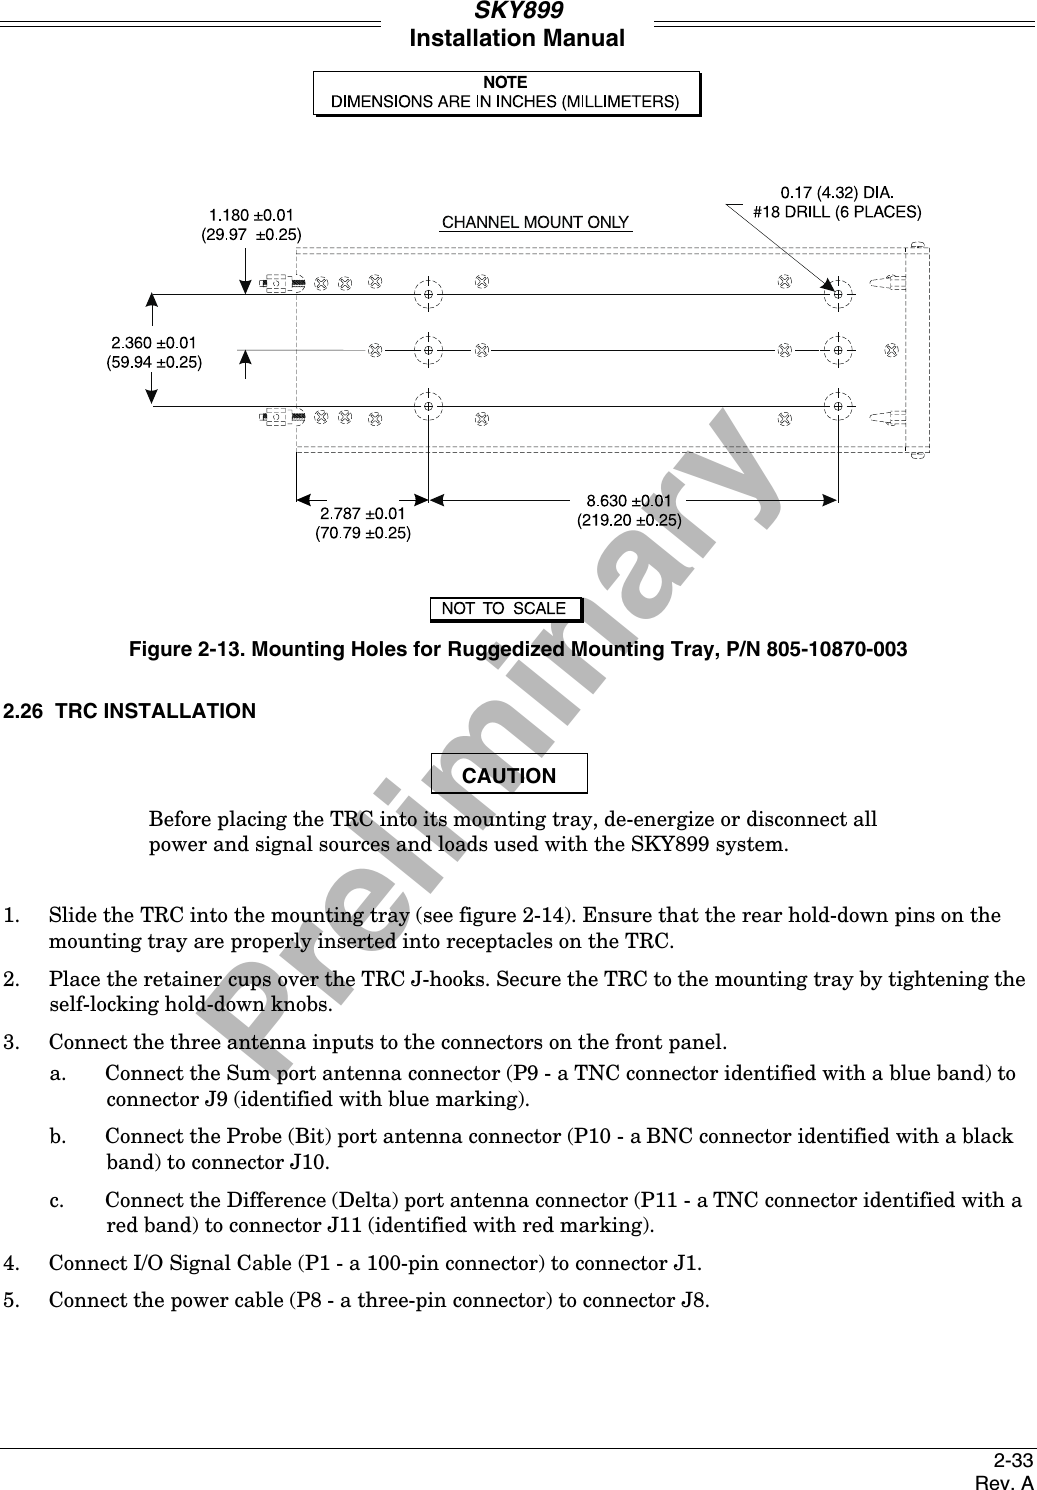 PreliminarySKY899Installation Manual2-33Rev. AFigure 2-13. Mounting Holes for Ruggedized Mounting Tray, P/N 805-10870-0032.26  TRC INSTALLATIONCAUTIONBefore placing the TRC into its mounting tray, de-energize or disconnect allpower and signal sources and loads used with the SKY899 system.1. Slide the TRC into the mounting tray (see figure 2-14). Ensure that the rear hold-down pins on themounting tray are properly inserted into receptacles on the TRC.2.  Place the retainer cups over the TRC J-hooks. Secure the TRC to the mounting tray by tightening theself-locking hold-down knobs.3. Connect the three antenna inputs to the connectors on the front panel.a. Connect the Sum port antenna connector (P9 - a TNC connector identified with a blue band) toconnector J9 (identified with blue marking).b. Connect the Probe (Bit) port antenna connector (P10 - a BNC connector identified with a blackband) to connector J10.c. Connect the Difference (Delta) port antenna connector (P11 - a TNC connector identified with ared band) to connector J11 (identified with red marking).4. Connect I/O Signal Cable (P1 - a 100-pin connector) to connector J1.5. Connect the power cable (P8 - a three-pin connector) to connector J8.